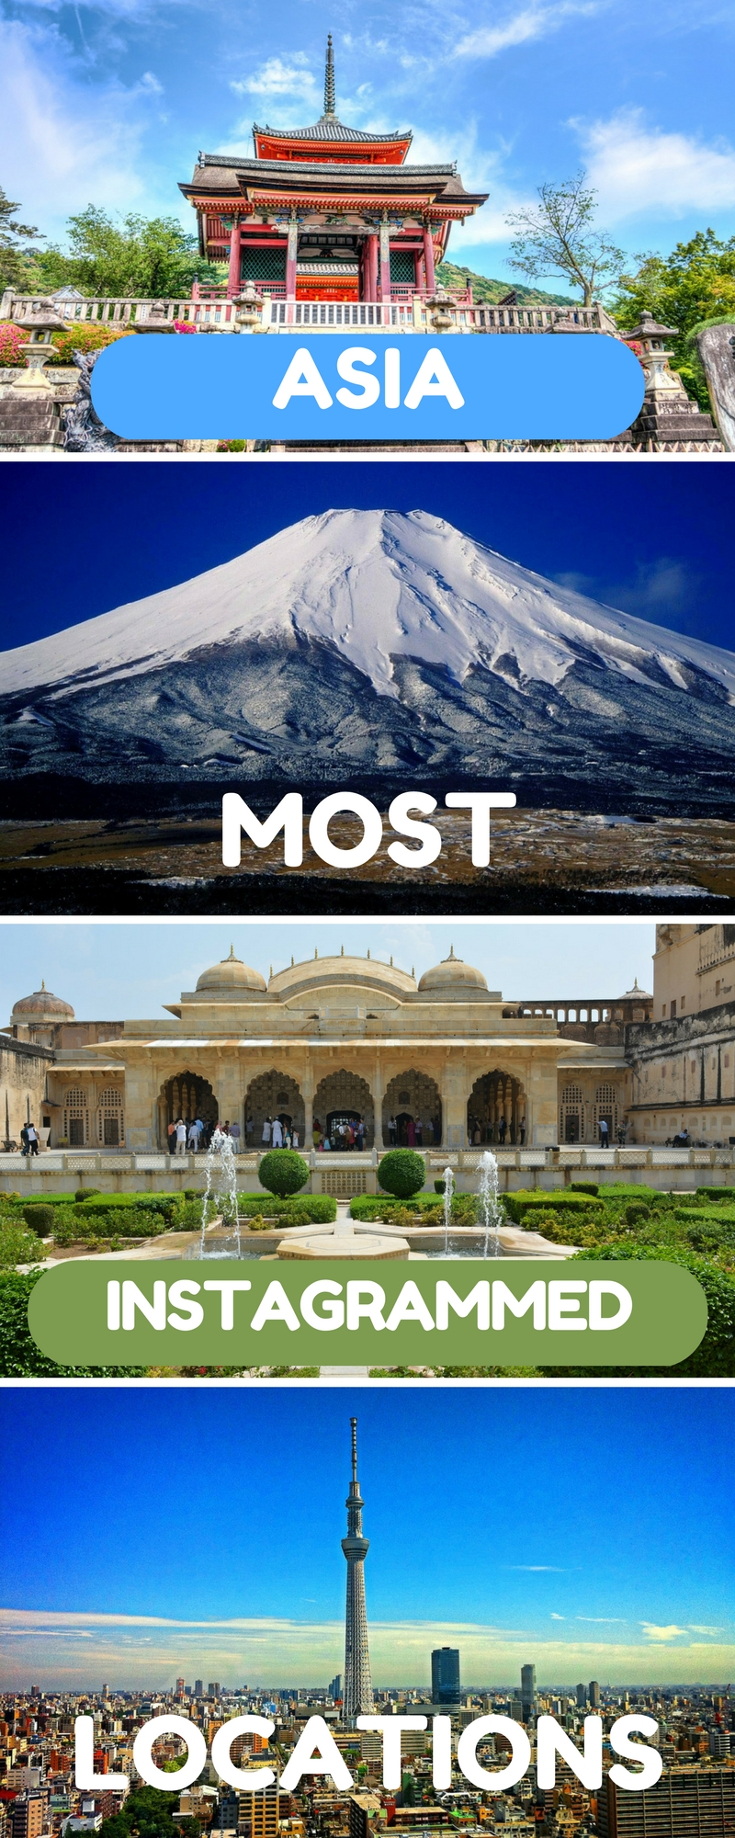 Top Places in Asia by Instagram Likes 